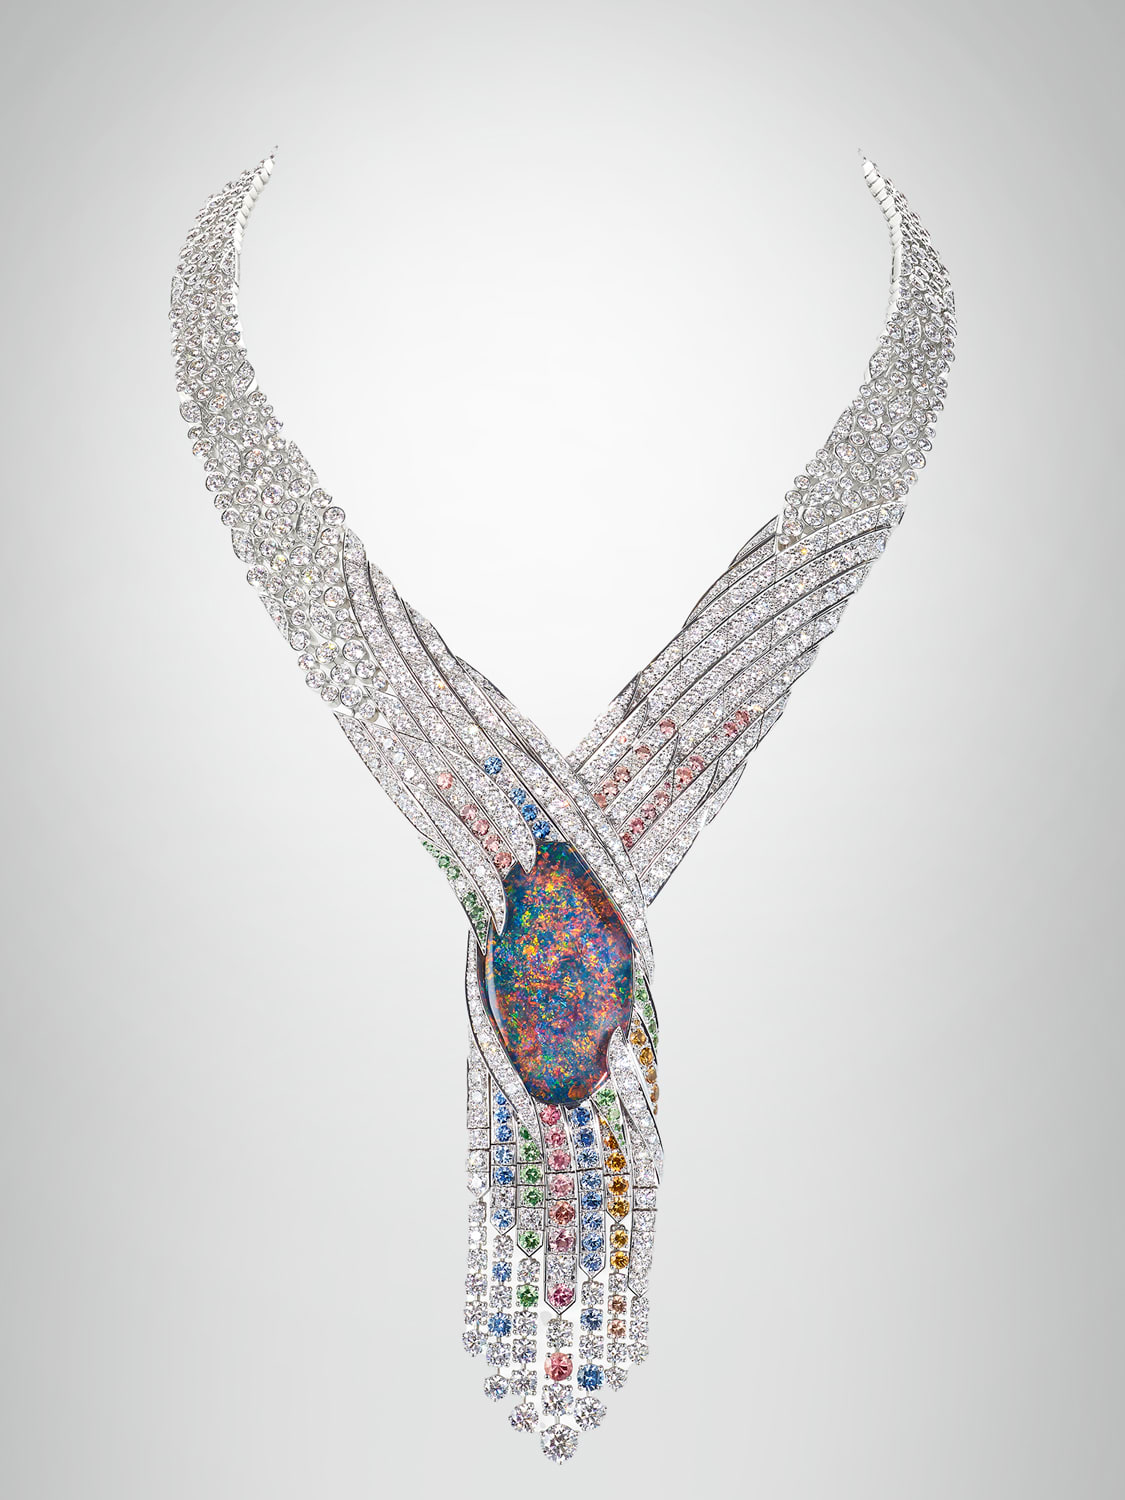 Chaumet, Louis Vuitton, Cartier and Tiffany & Co: the most exquisite  collections of fine and diamond jewelry - inspiration for Mother's Day -  Rubel & Ménasché